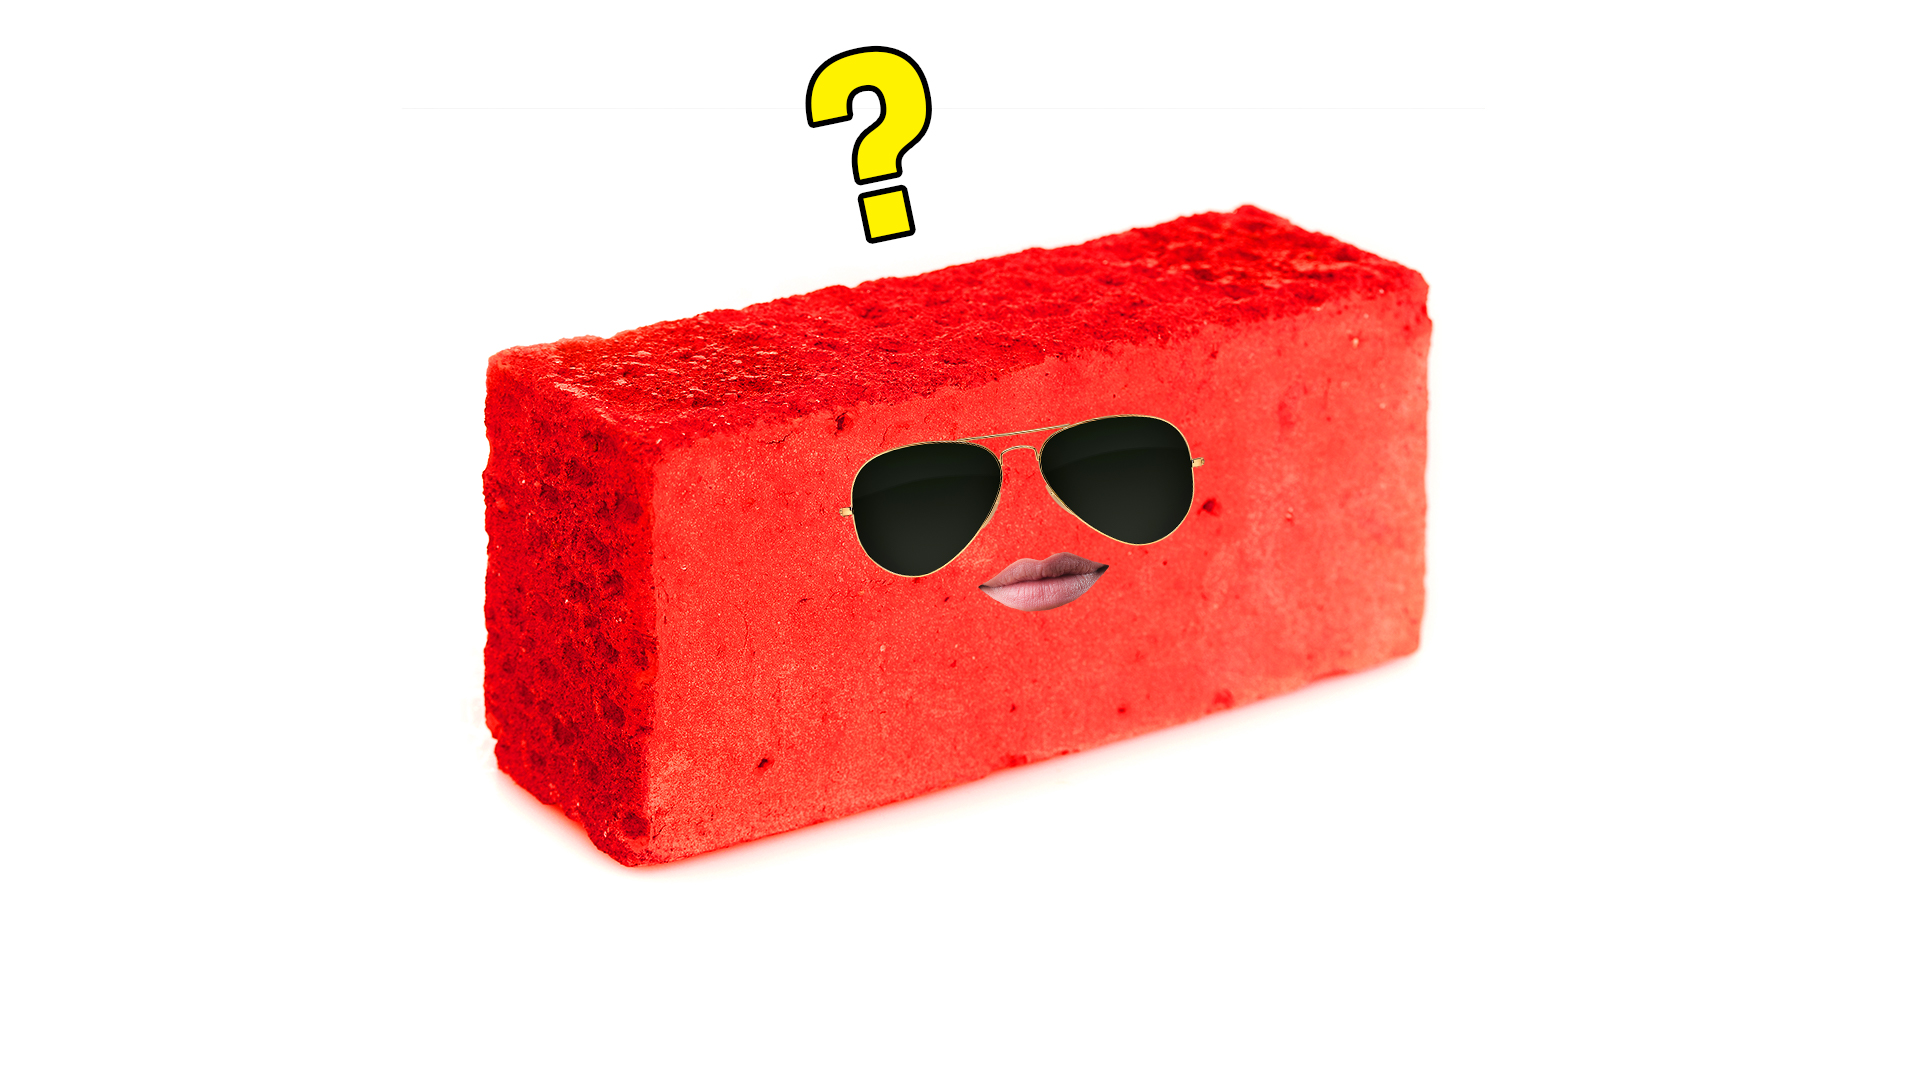 A mysterious red brick